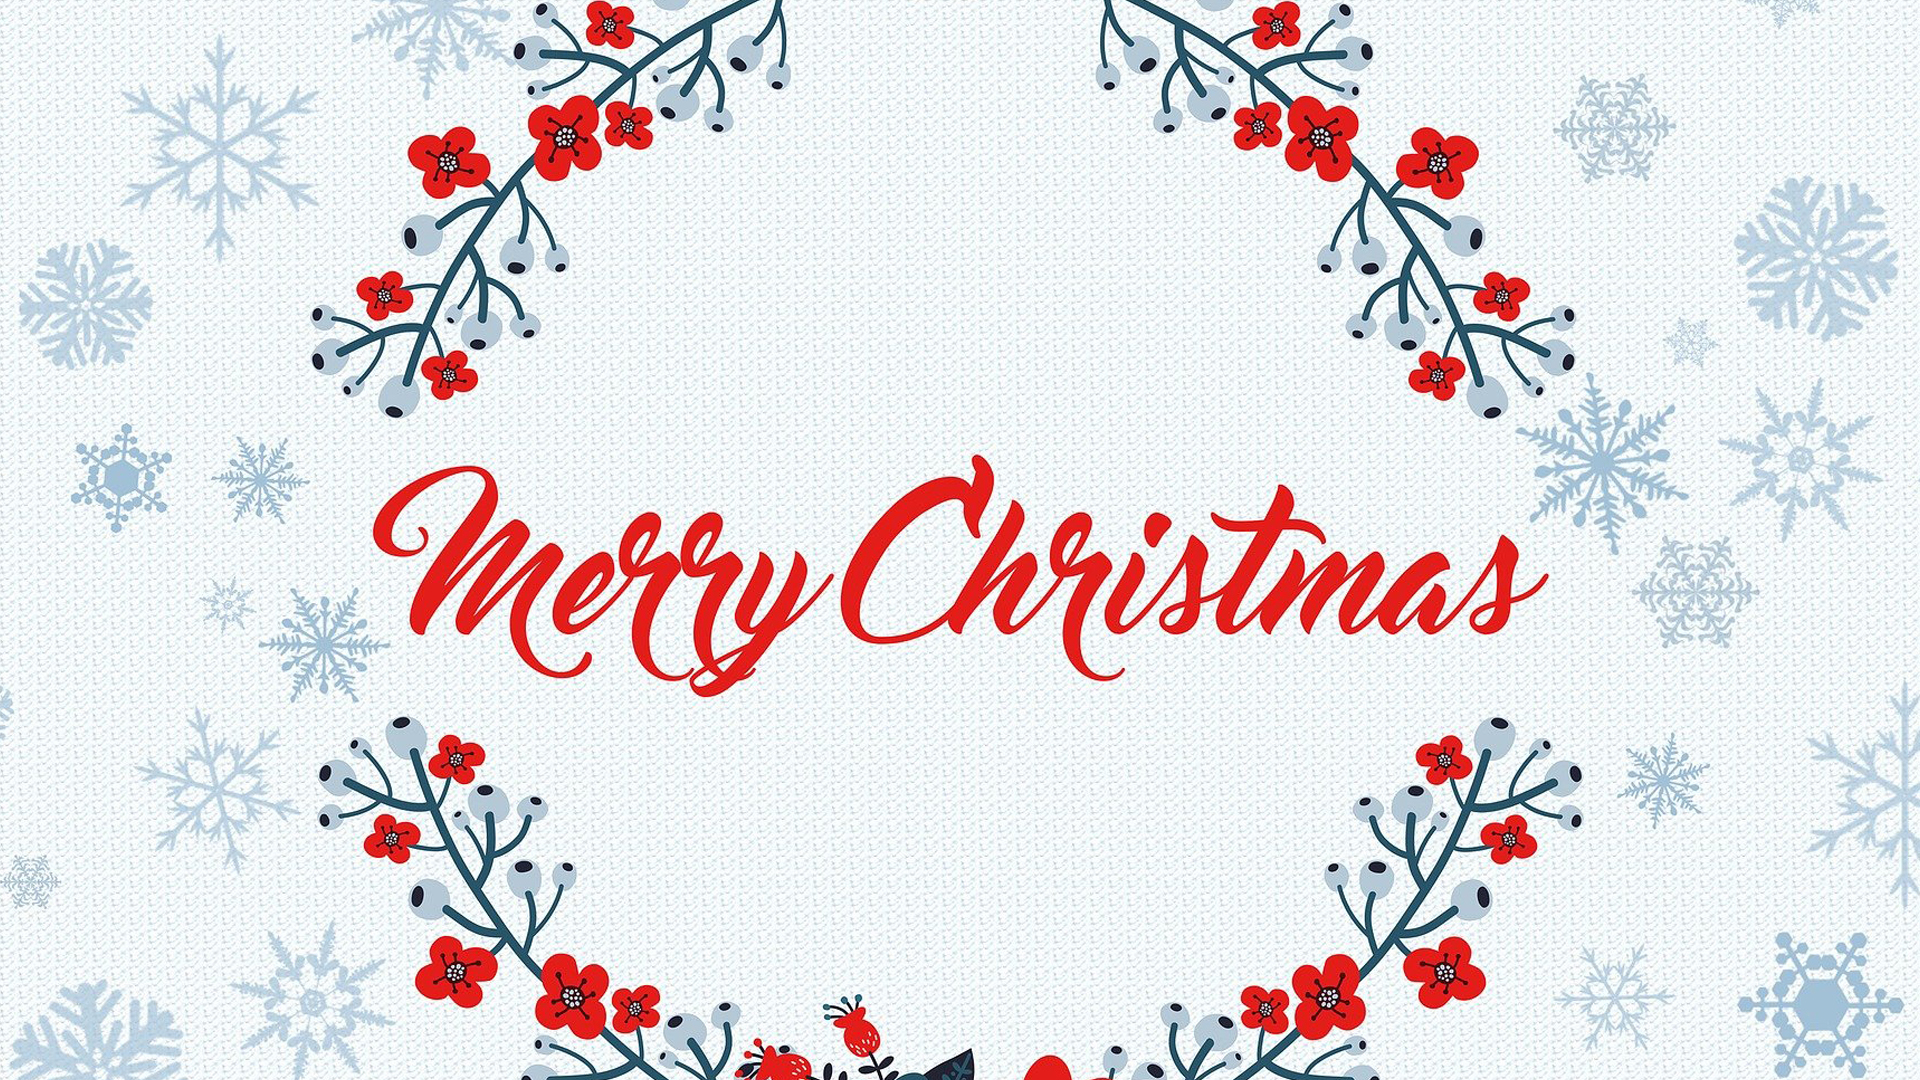 Grey and white sweater pattern in the background with light blue snowflakes spread across the left and right sides of the graphic. Towards the middle there's a circular red and blue berry halo with the words Merry Christmas written in a red festive cursive font.